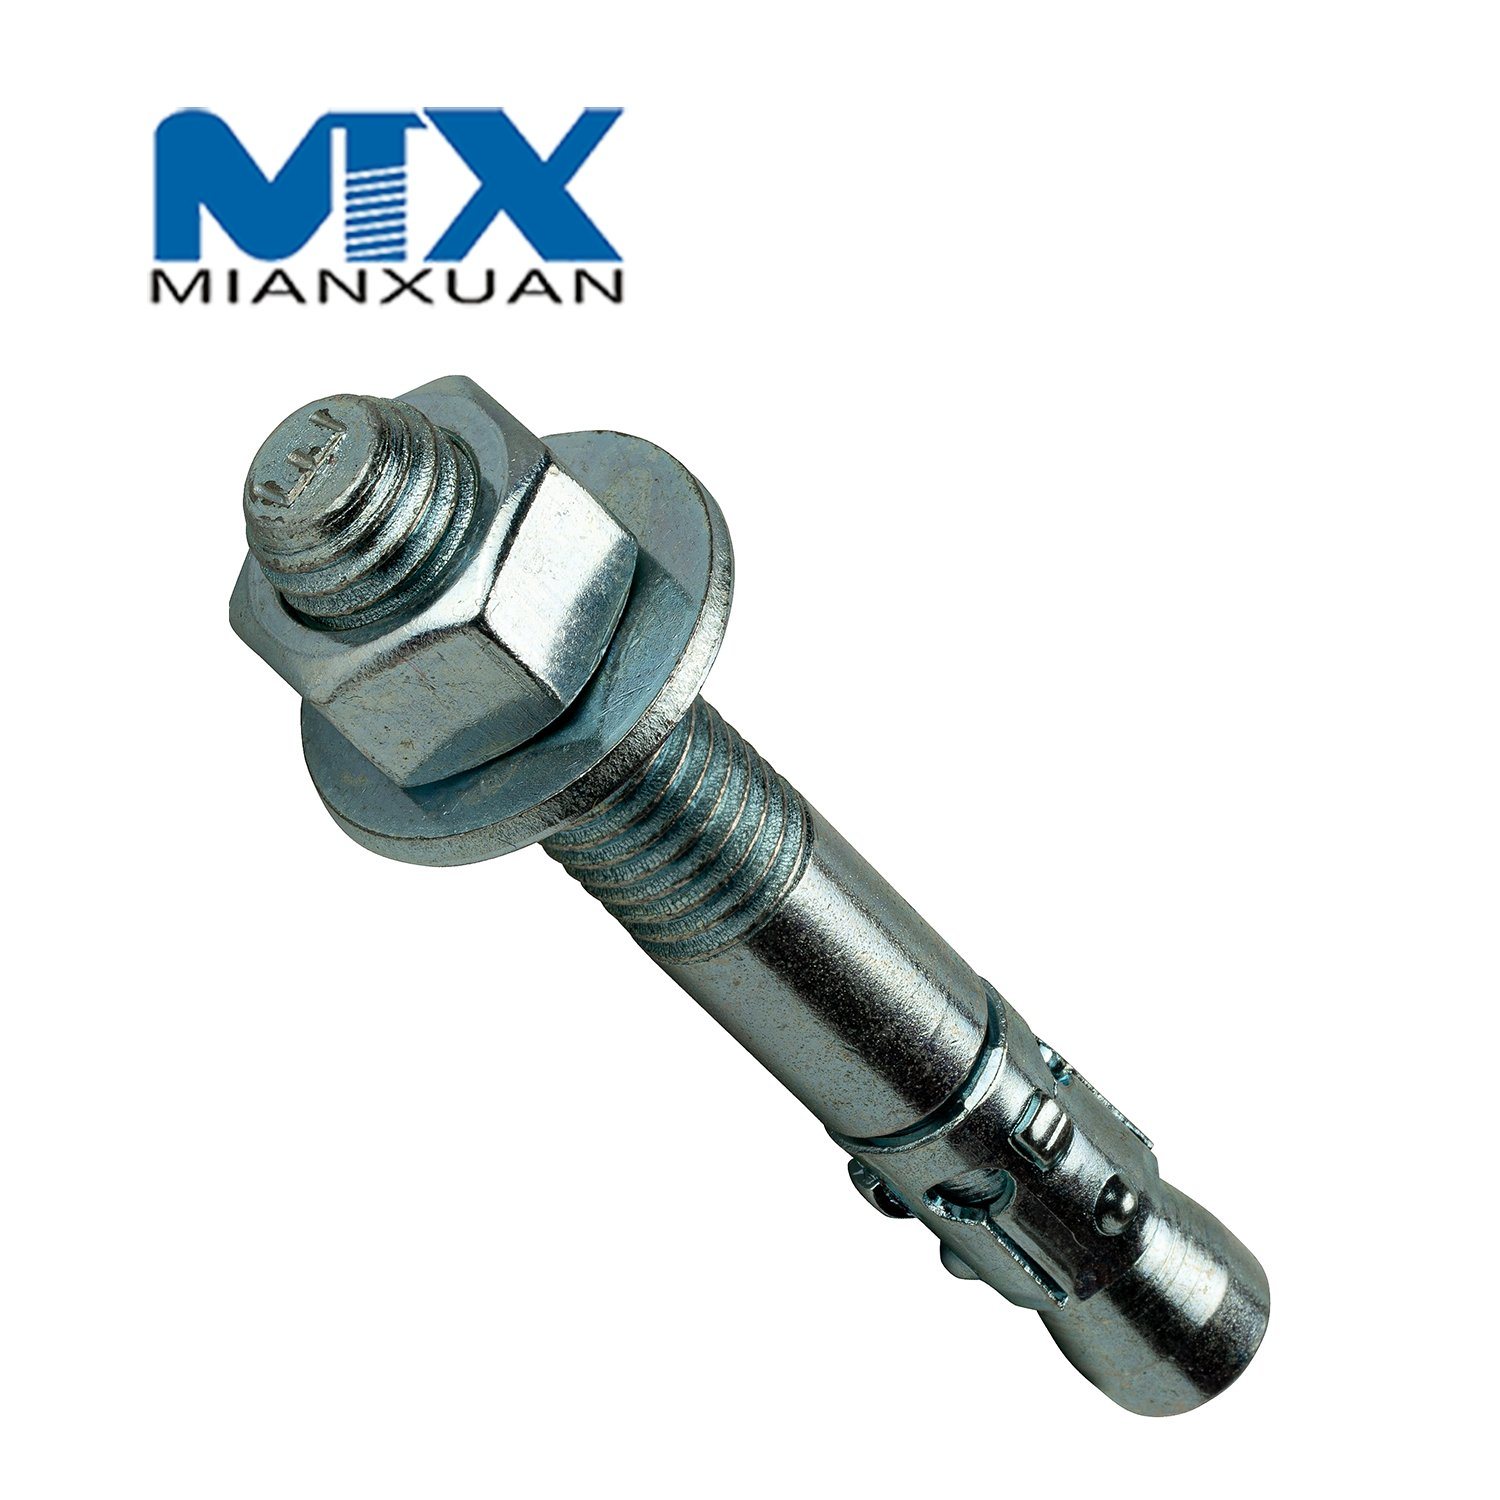 Stainless Steel Carriage Bolt for Mechanical Expansion Hollow Wall Lifting Anchor Fastener